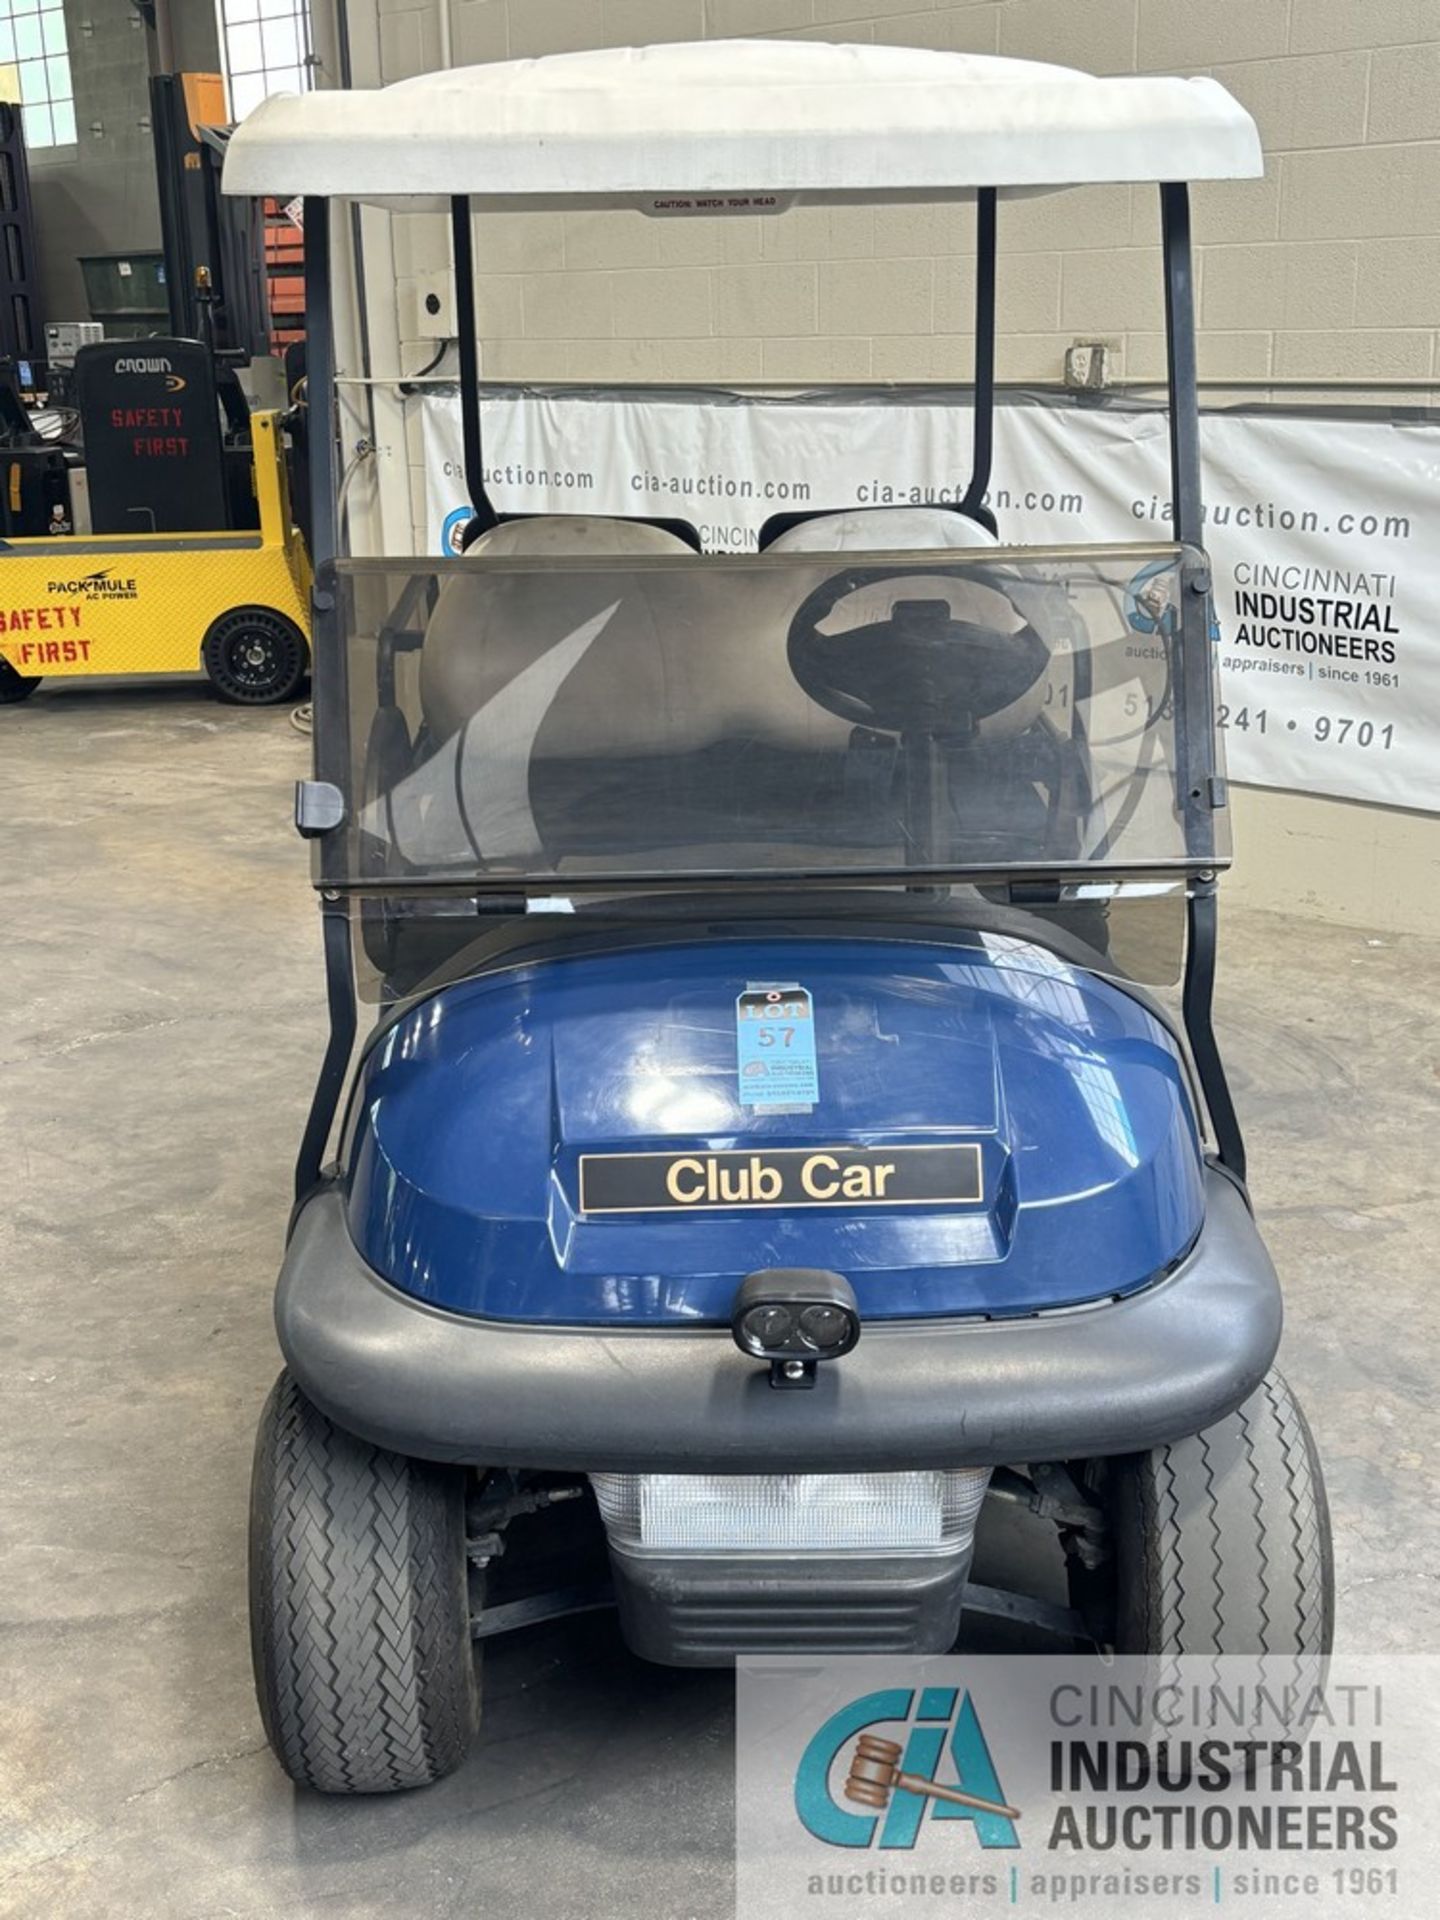 2016 CLUB CAR 4-PERSON ELECTRIC GOLF CART; S/N JH1608-623992, 48-VOLT, HOURS N/A, No Charger - Image 2 of 14